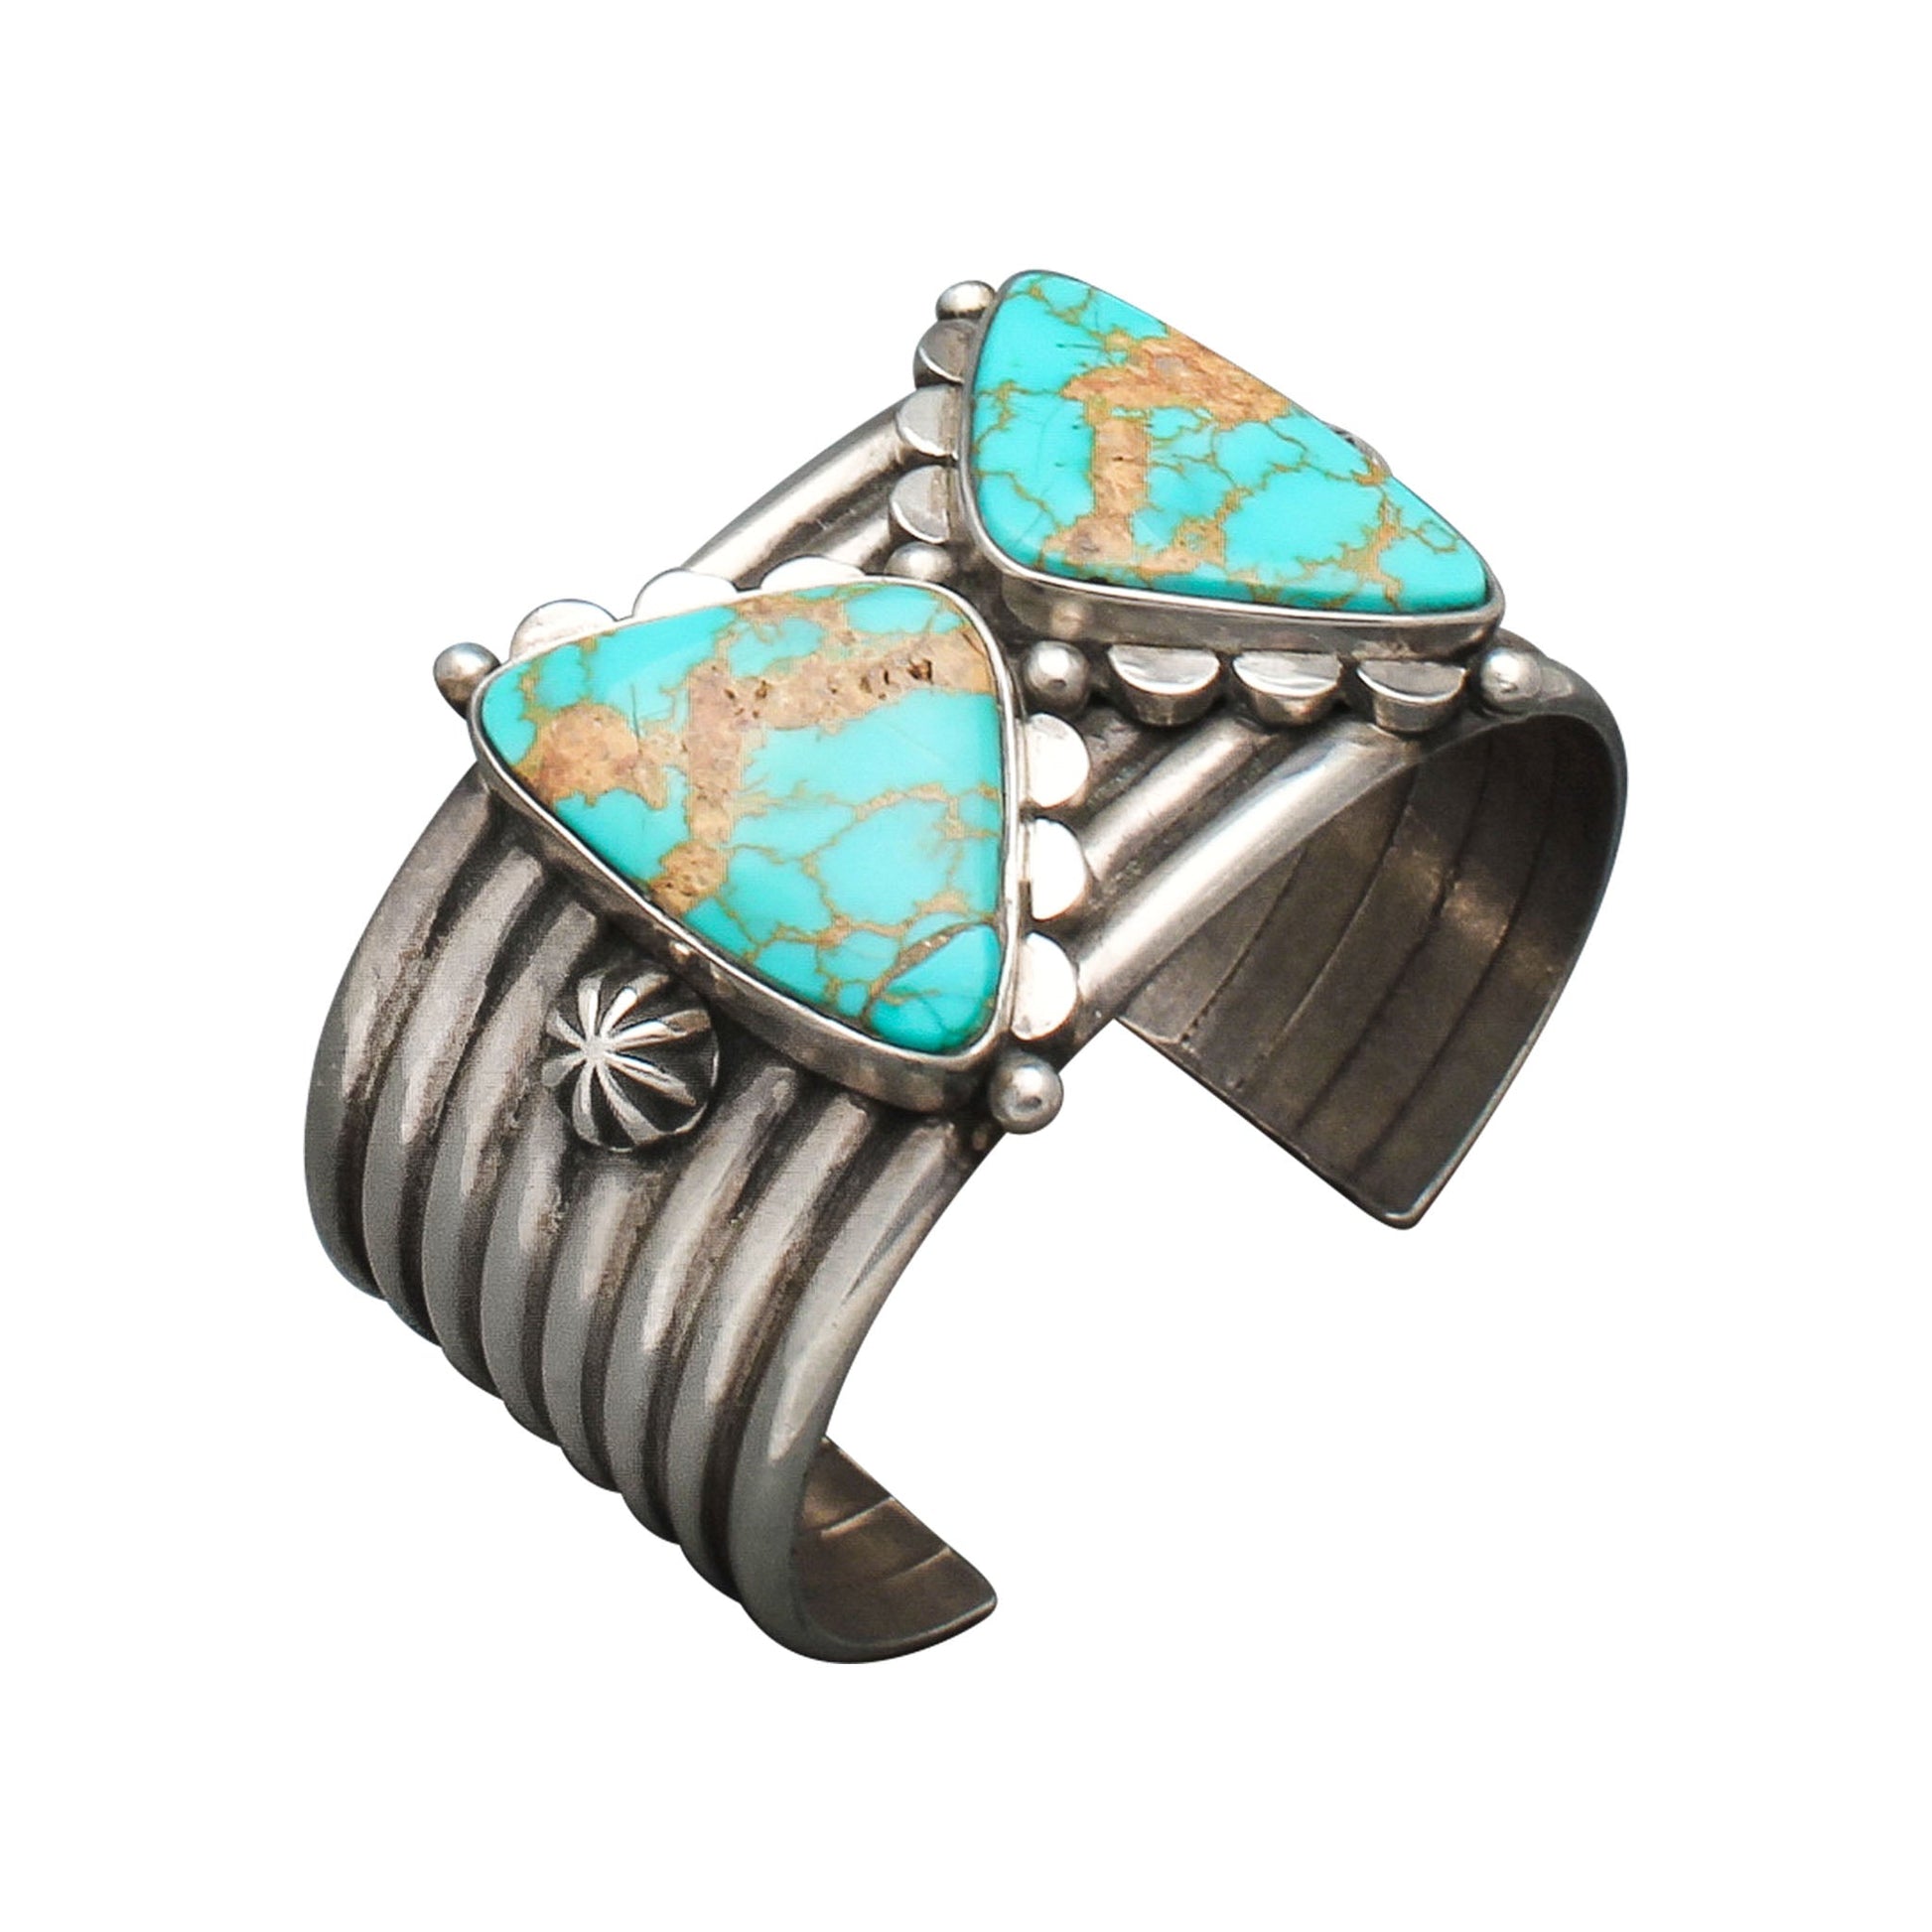 Mike Bird Romero Wide Silver Cuff of Natural Turquoise Butterfly - Turquoise & Tufa